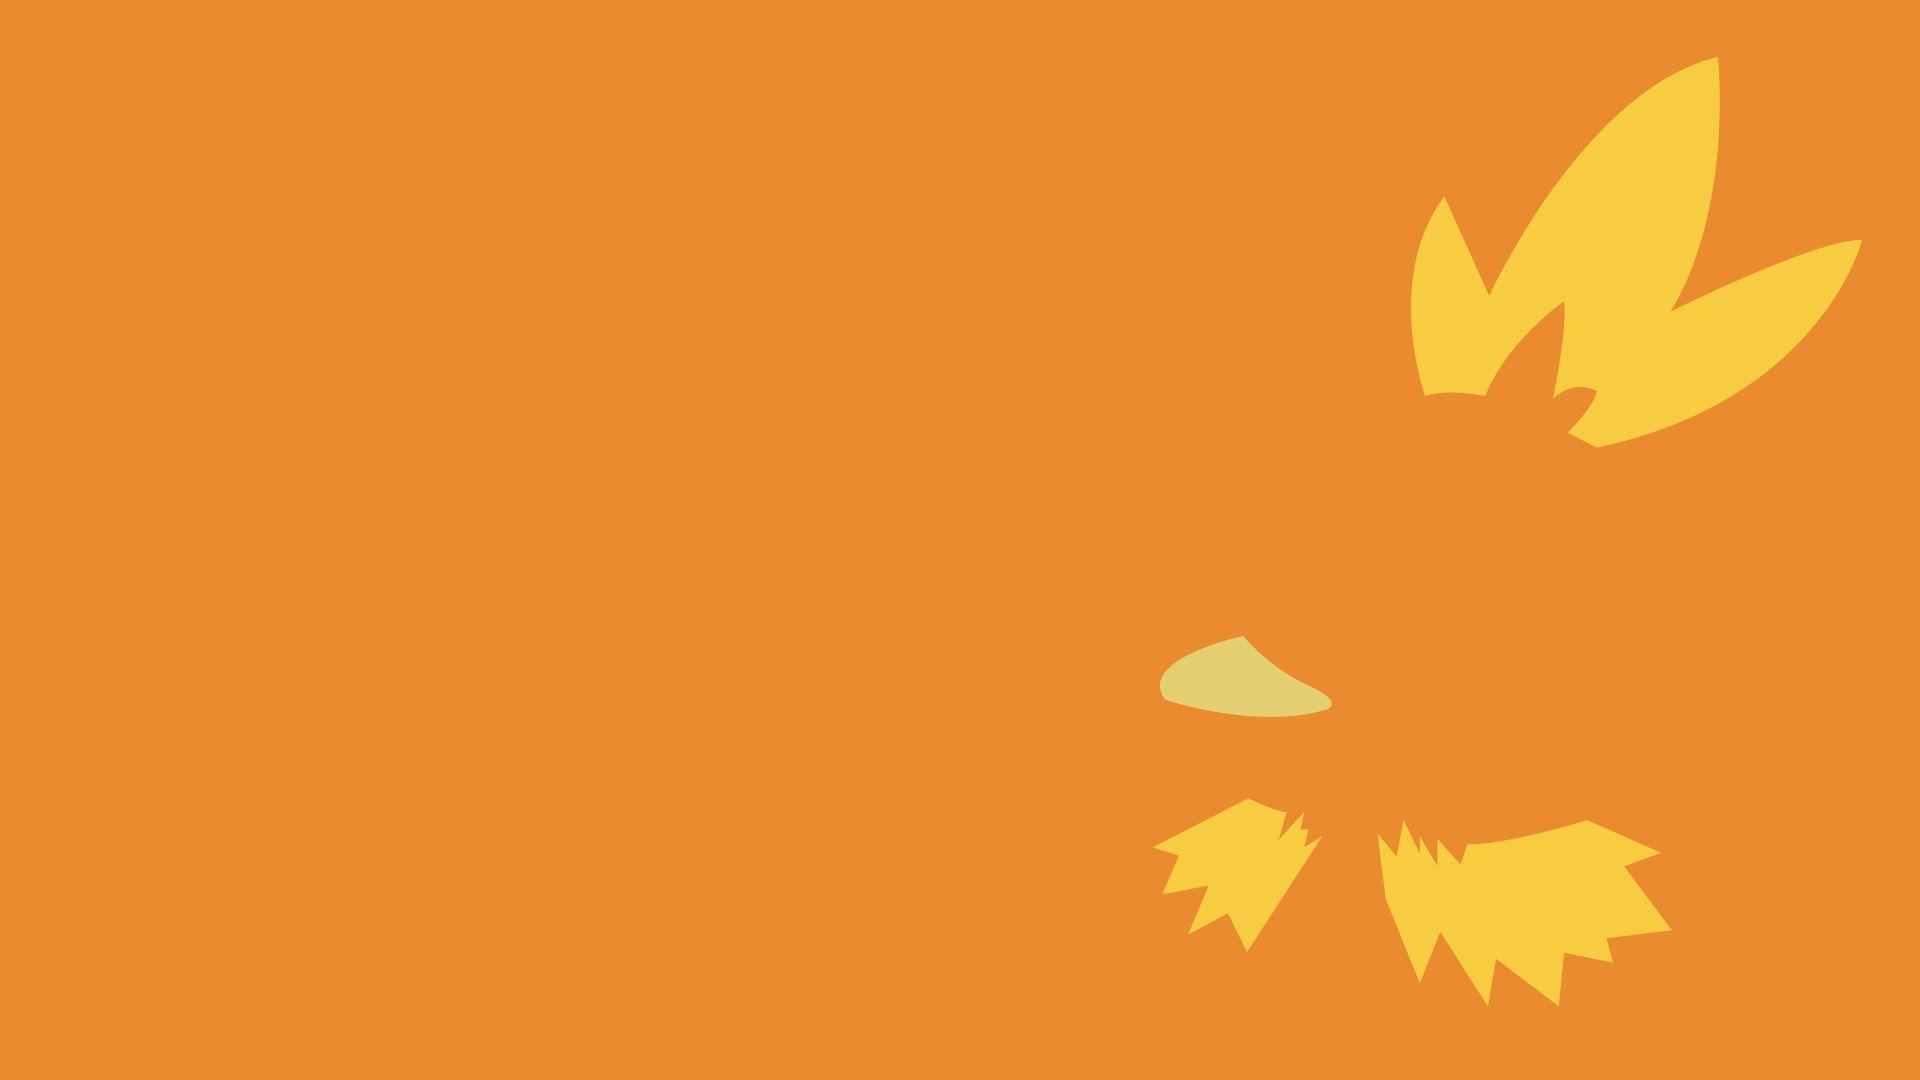 Torchic HD Wallpapers - Wallpaper Cave.